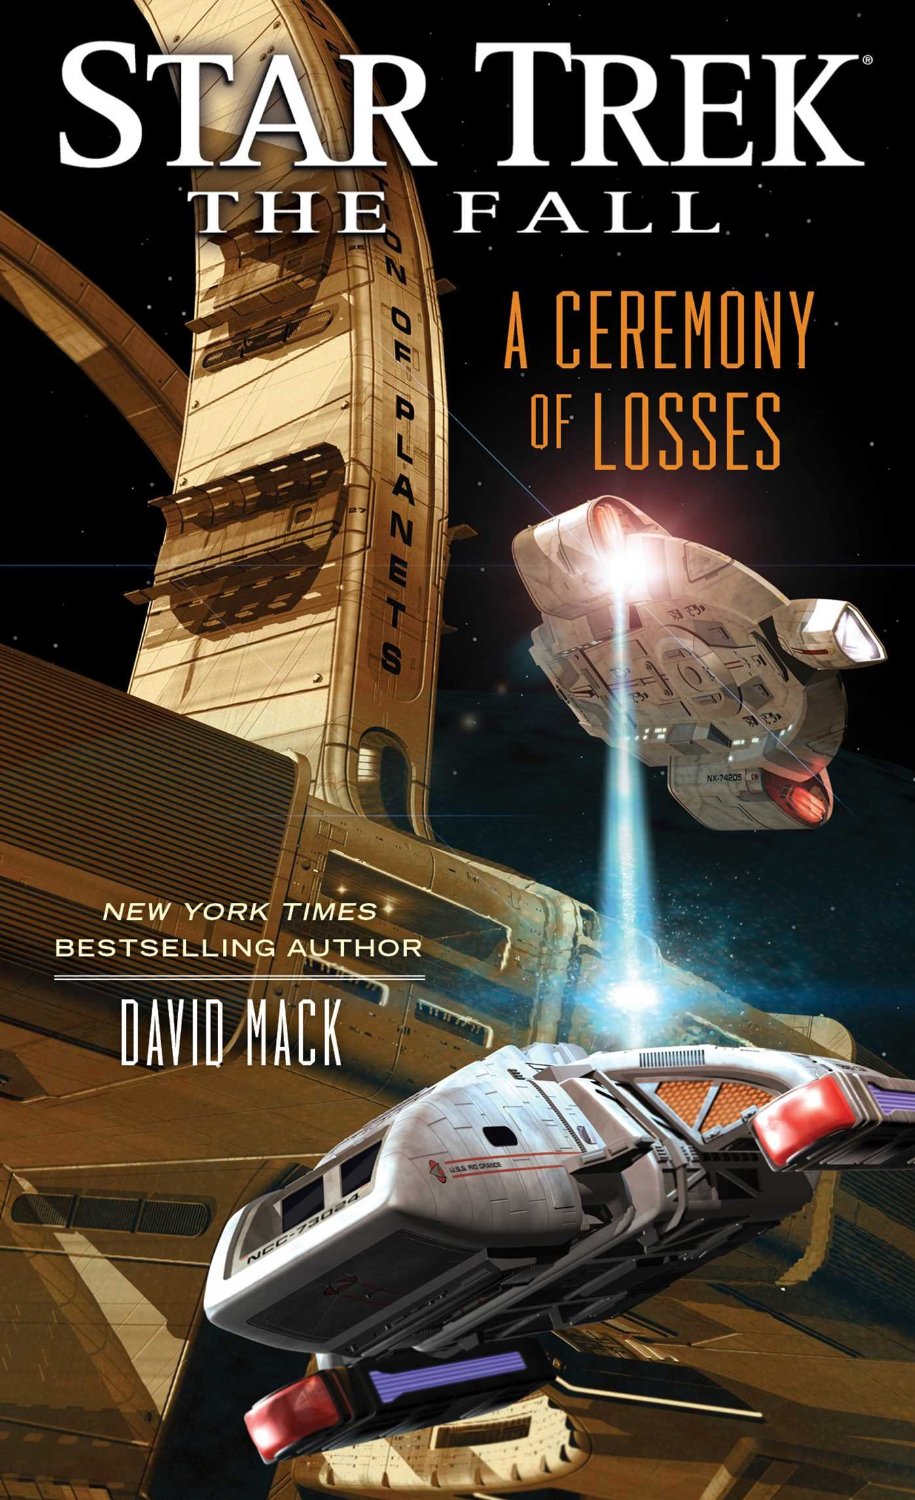 “Star Trek: The Fall: A Ceremony of Losses” Review by Tor.com